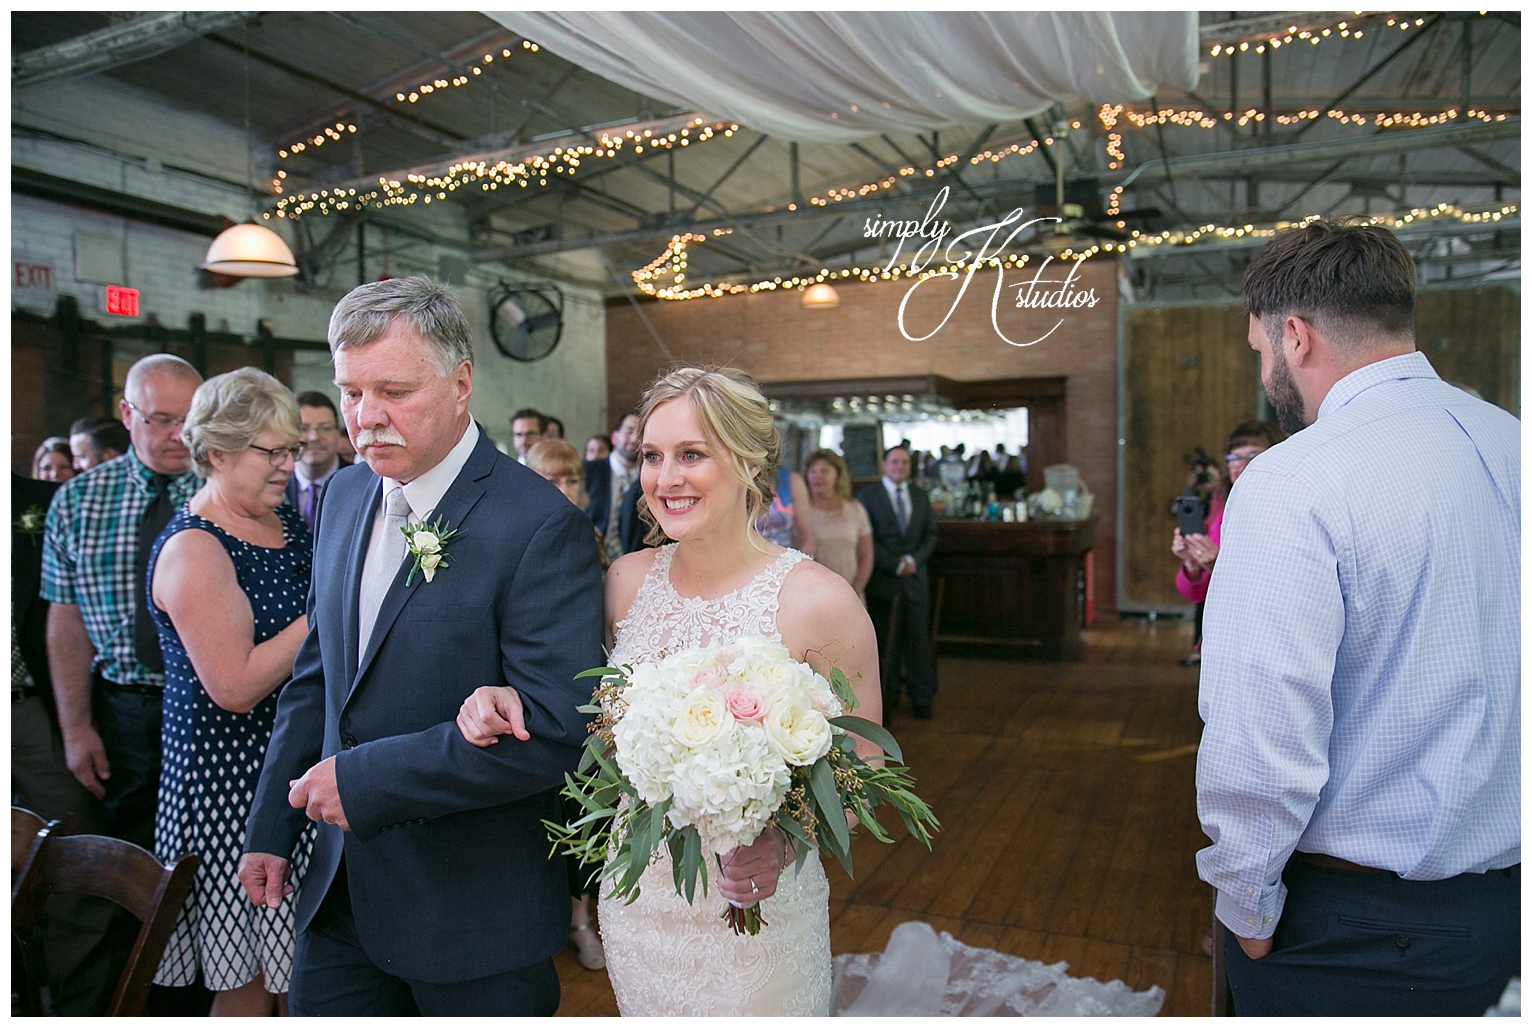 Wedding Ceremonies at The Lace Factory.jpg